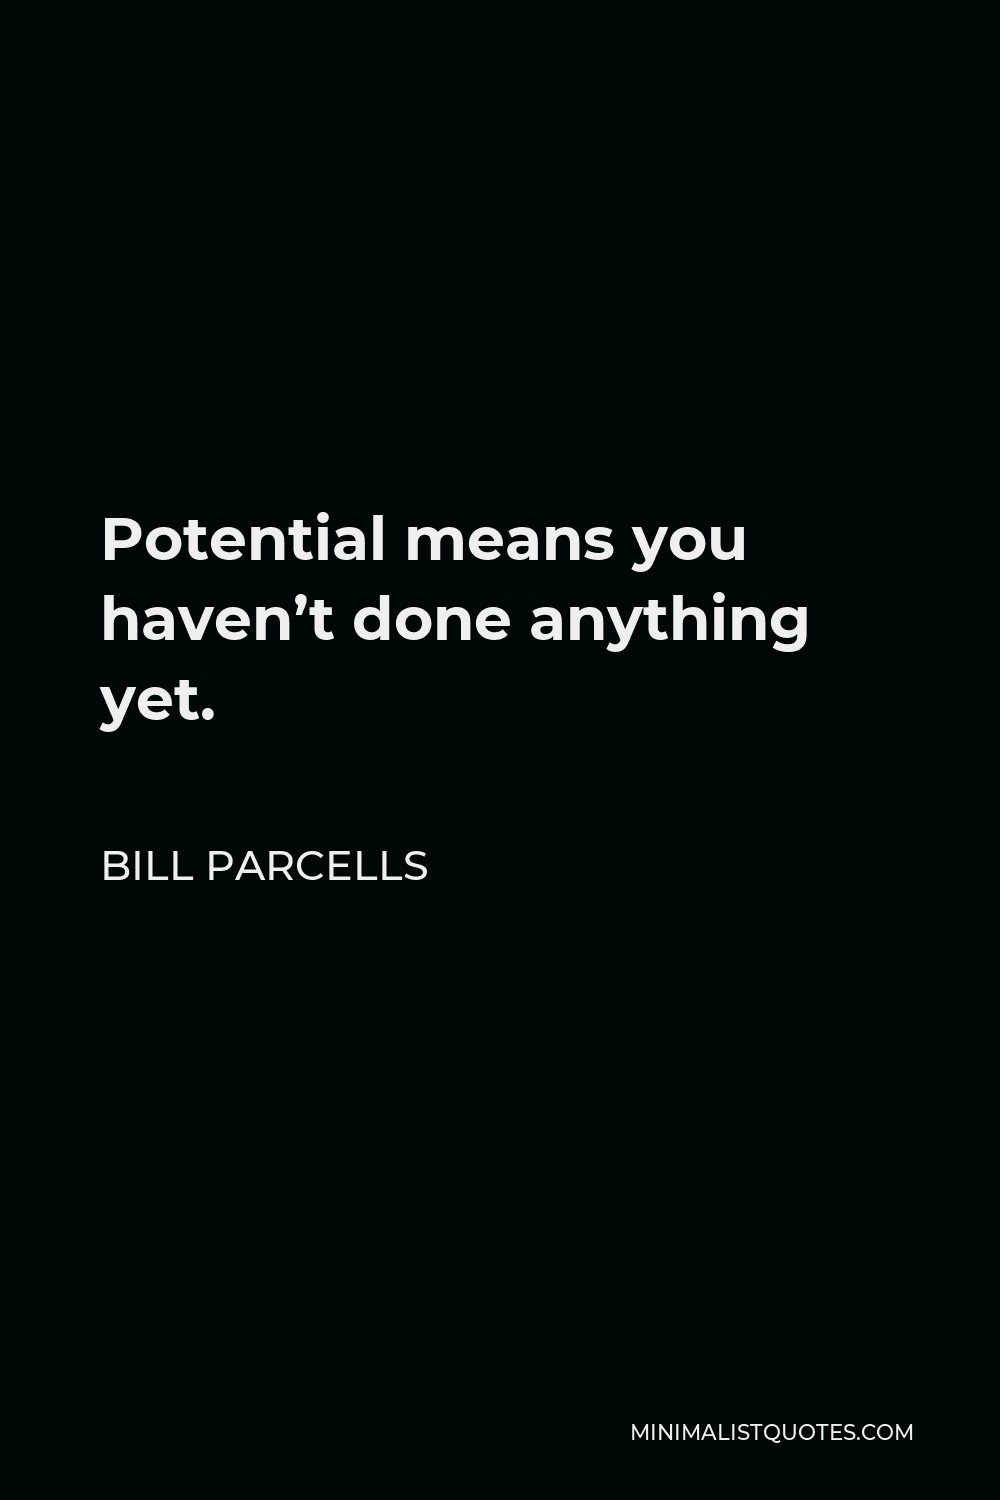 Bill Parcells Quote - Potential means you haven’t done anything yet.